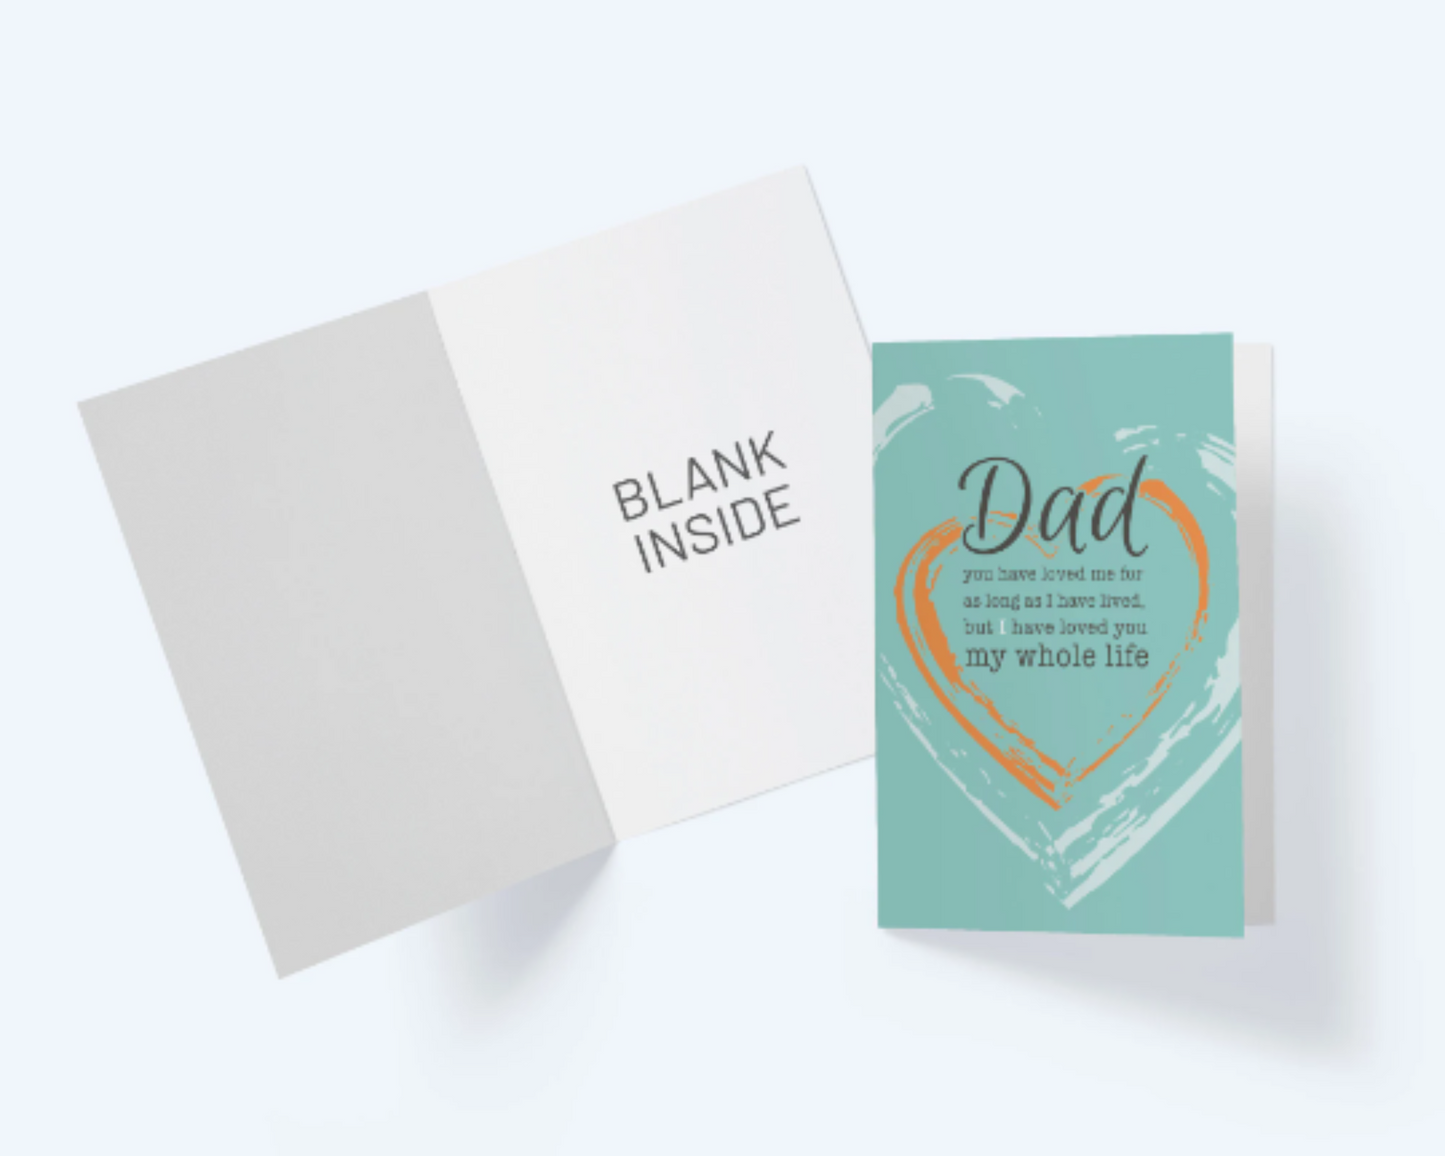 Dad - I Have Loved You My Whole Life - Greeting Card